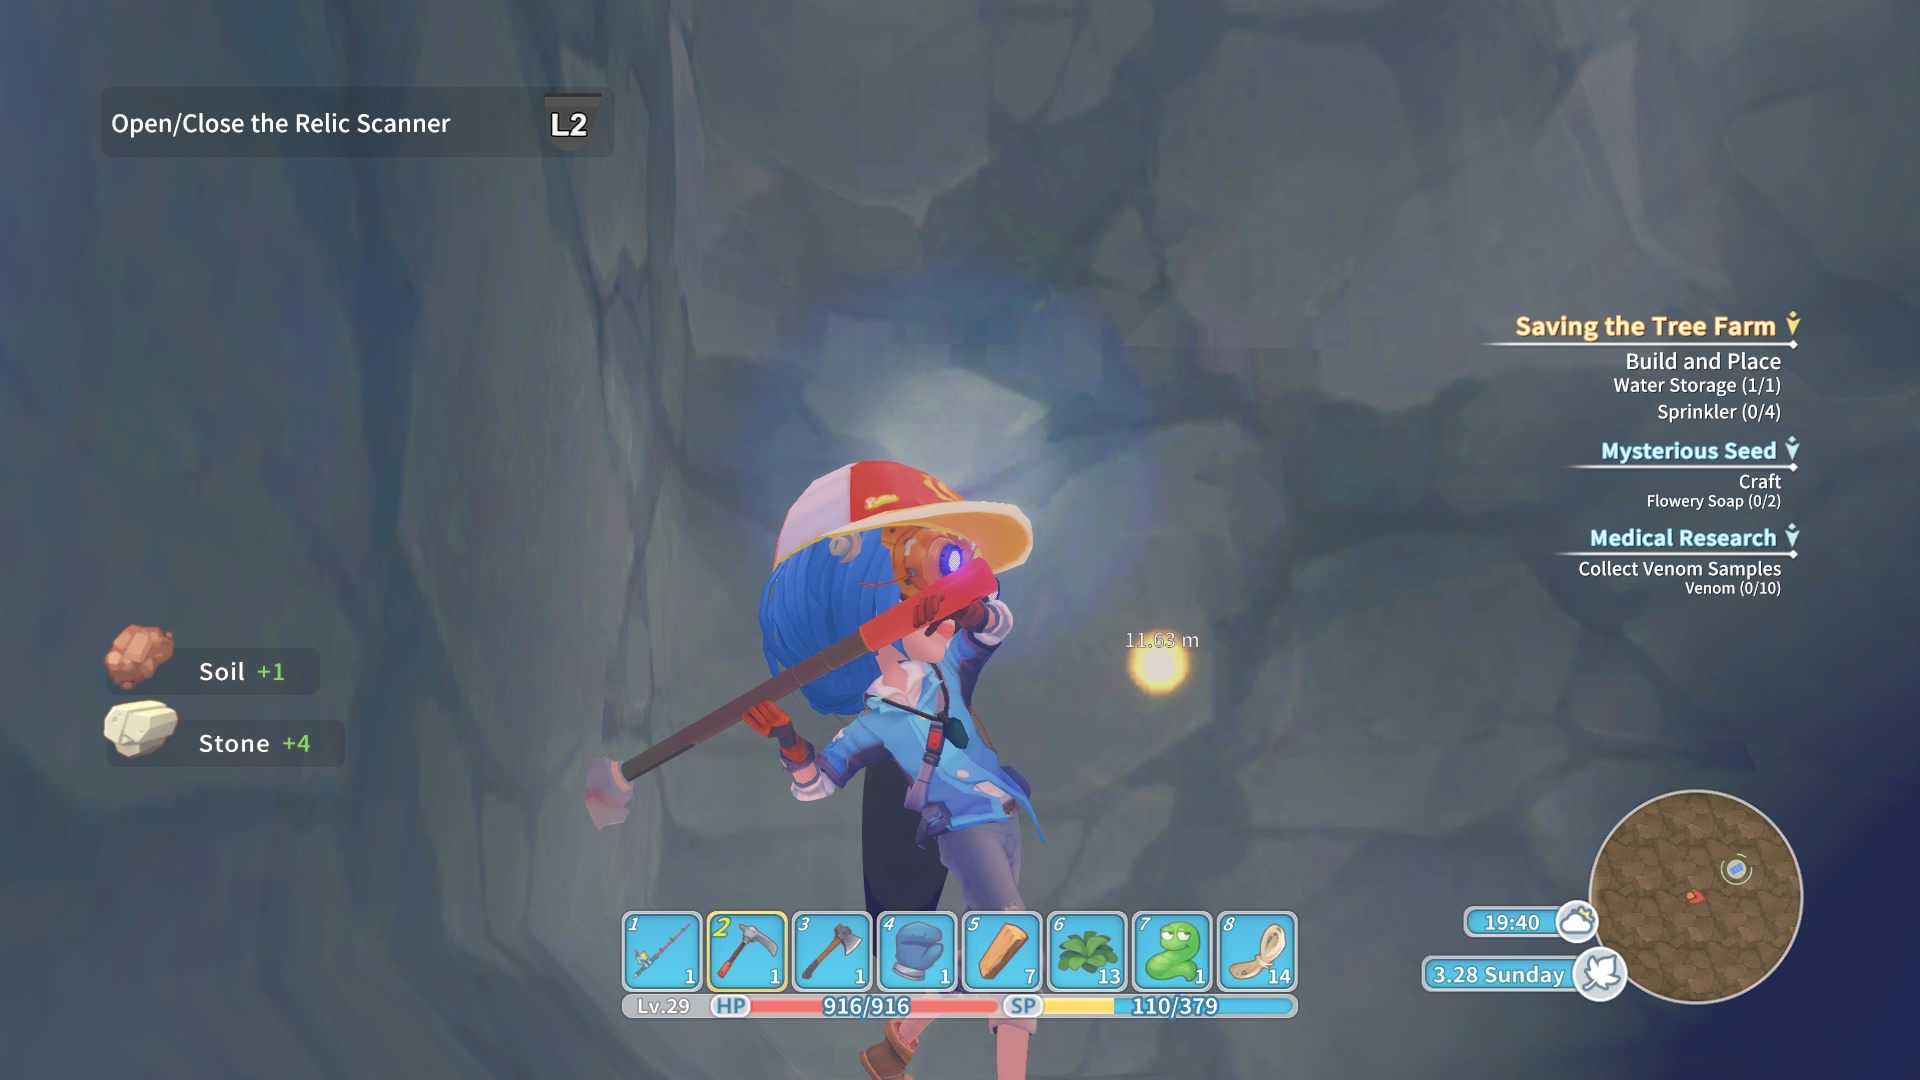 My Time at Portia review